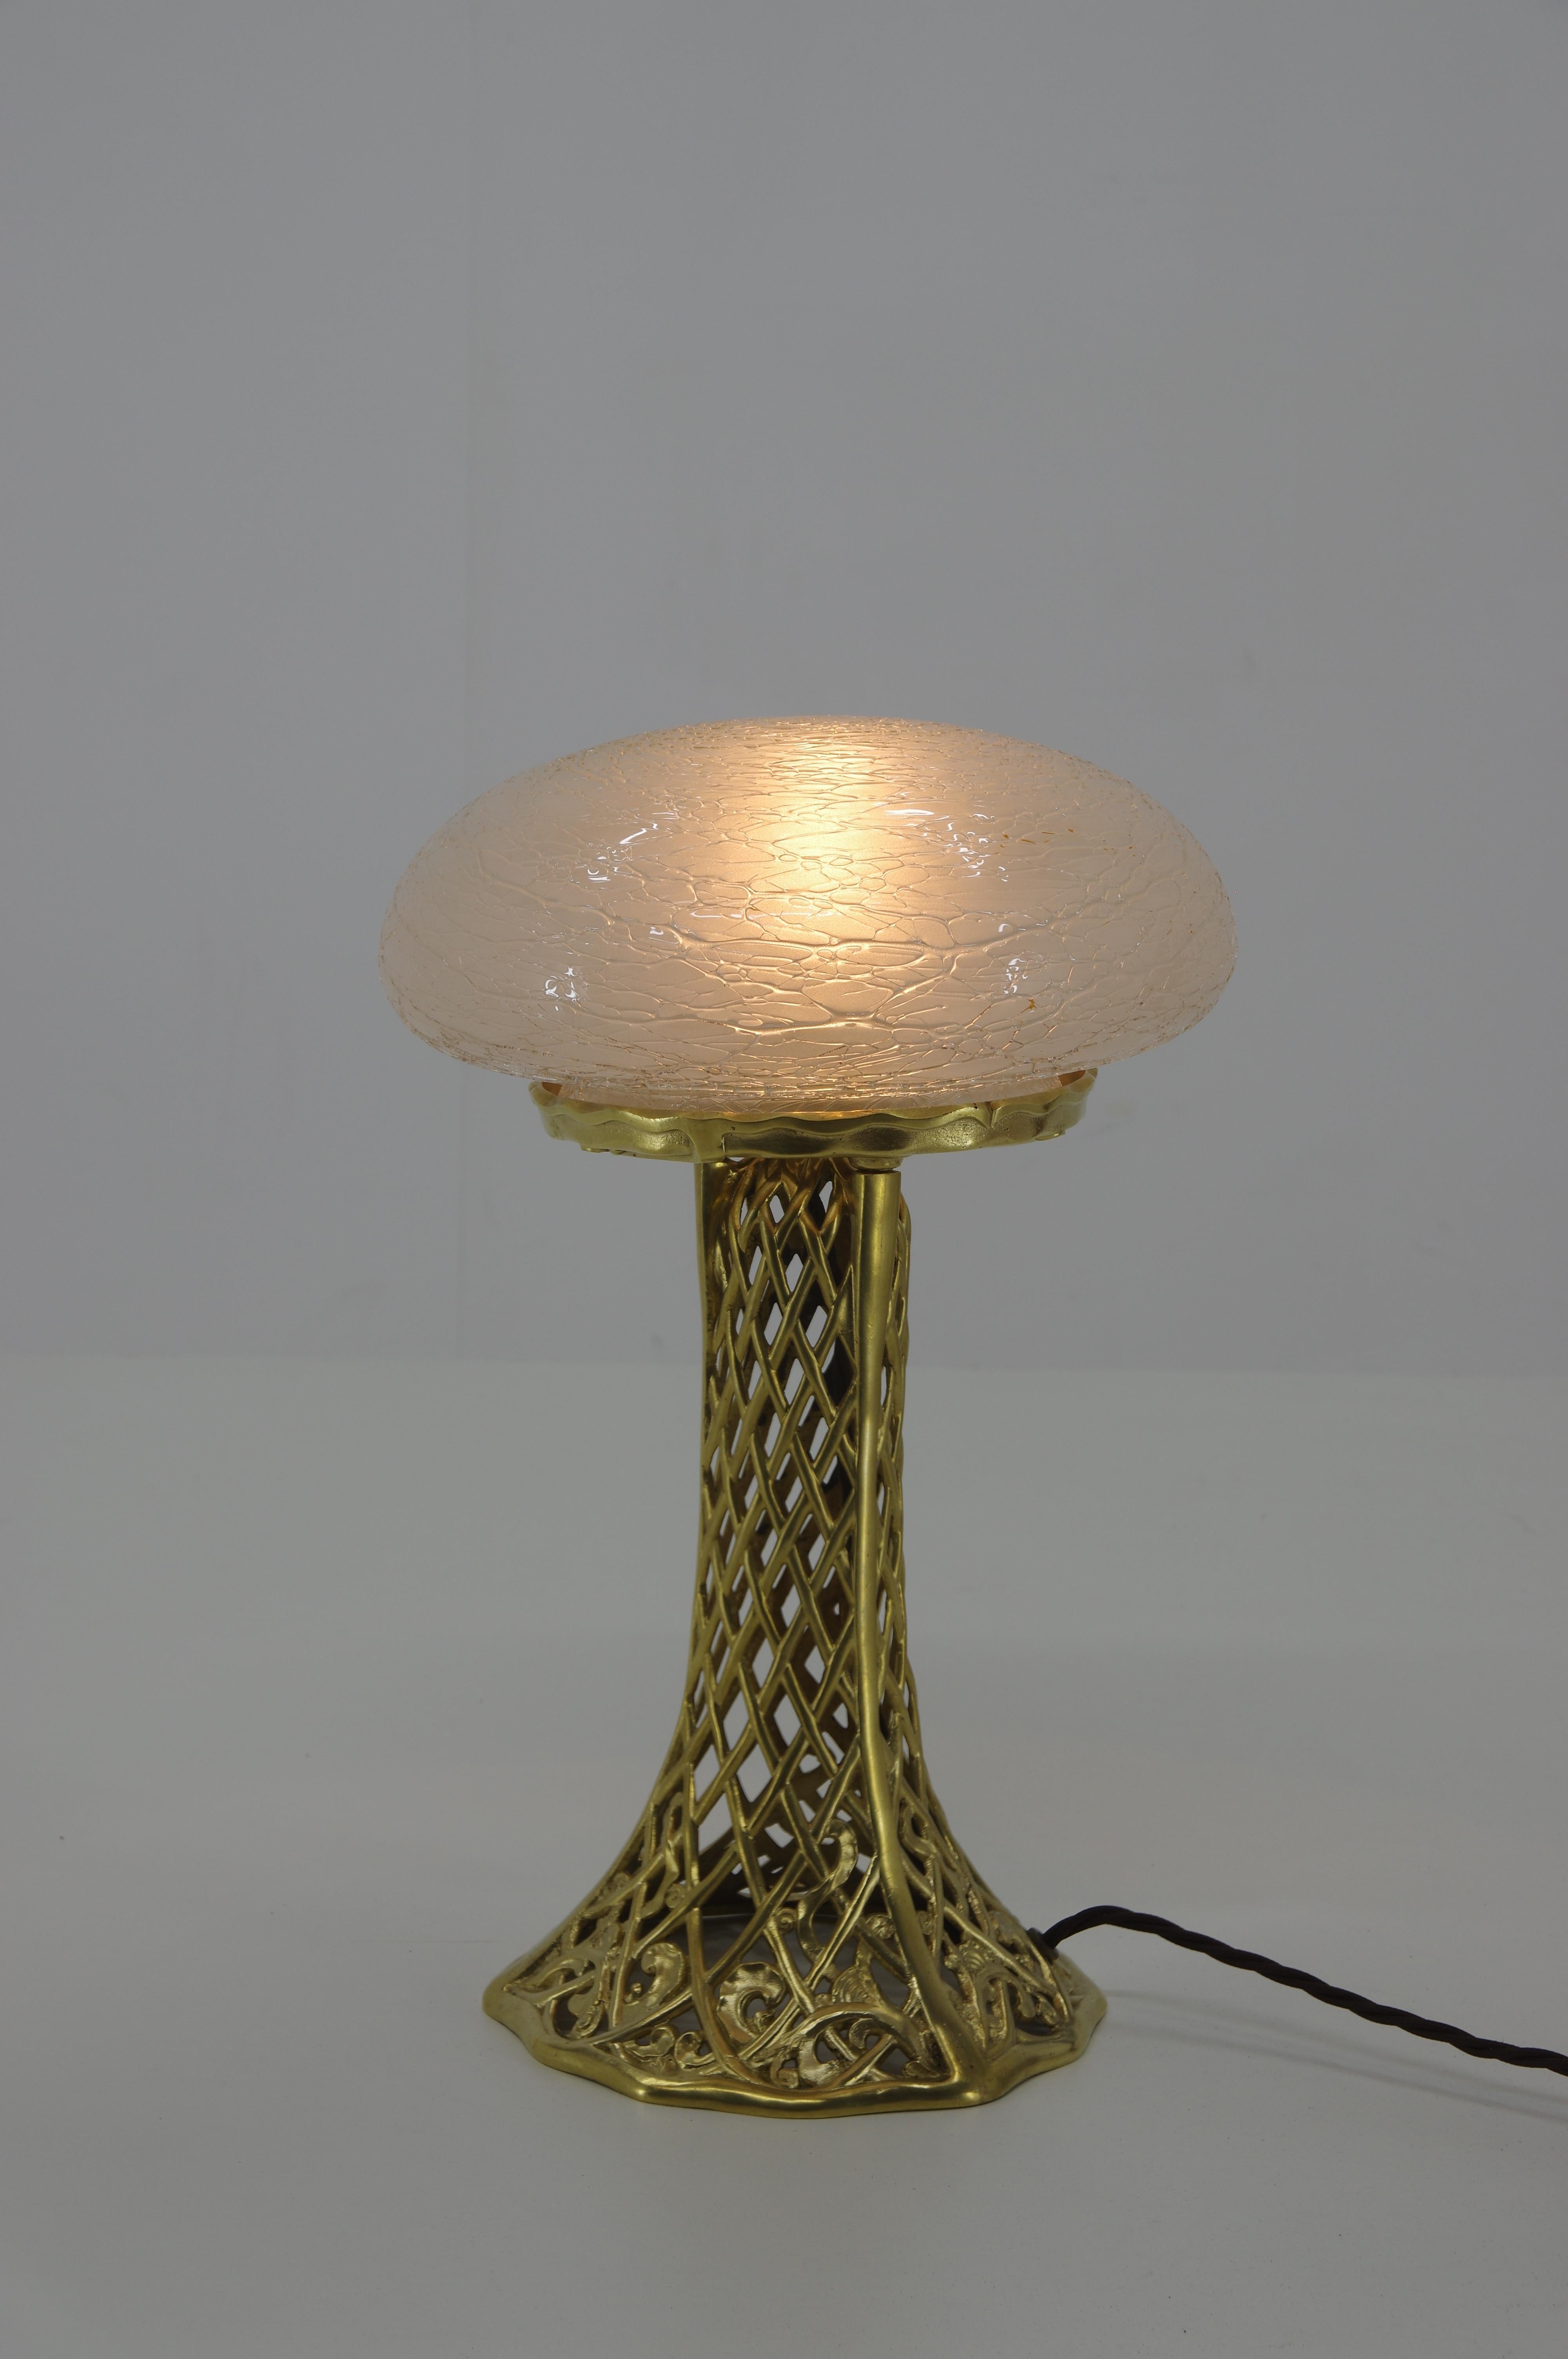 Beautiful Art Nouveau table lamp in a perfect condition, completely restored, new wiring, vintage switch. Glass shade without cracks.
Max 40W, E27 (E26) ceramic and brass socket.
Due to low height of the shade it has to be fitted with bulb with